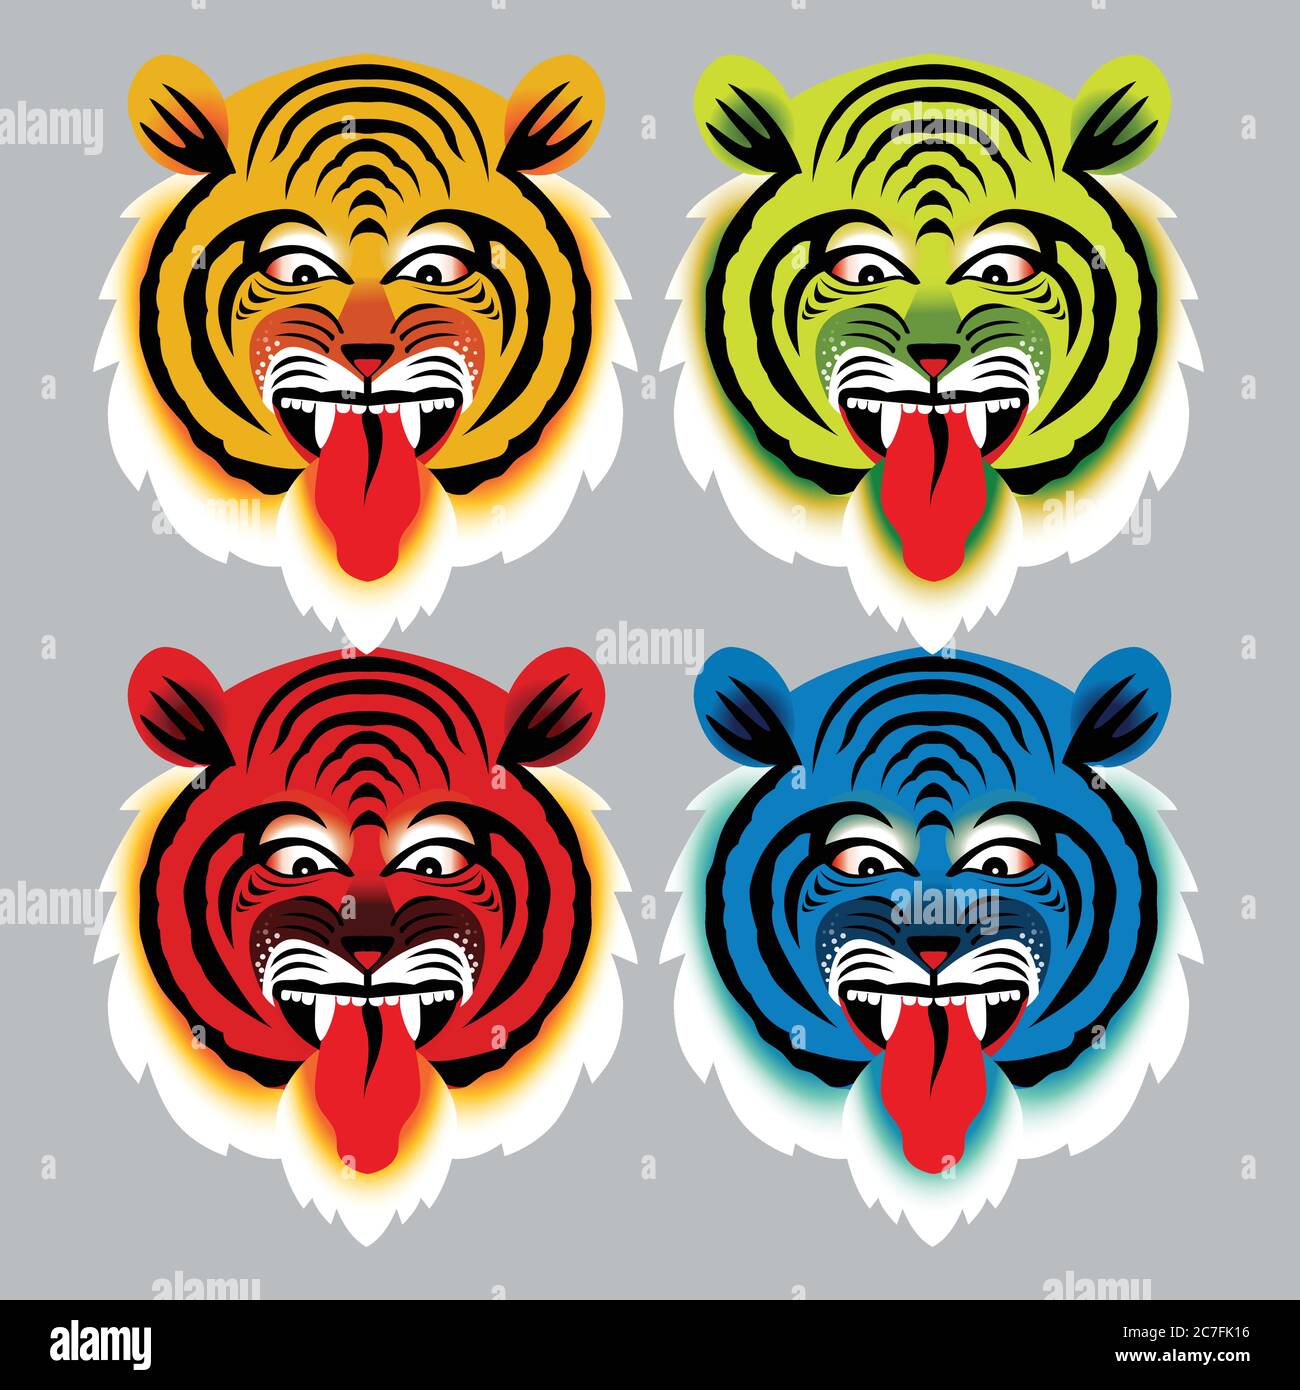 angry tiger face. isolated on white background. icon logo mascot vector illustration. color full mask cutout Stock Vector